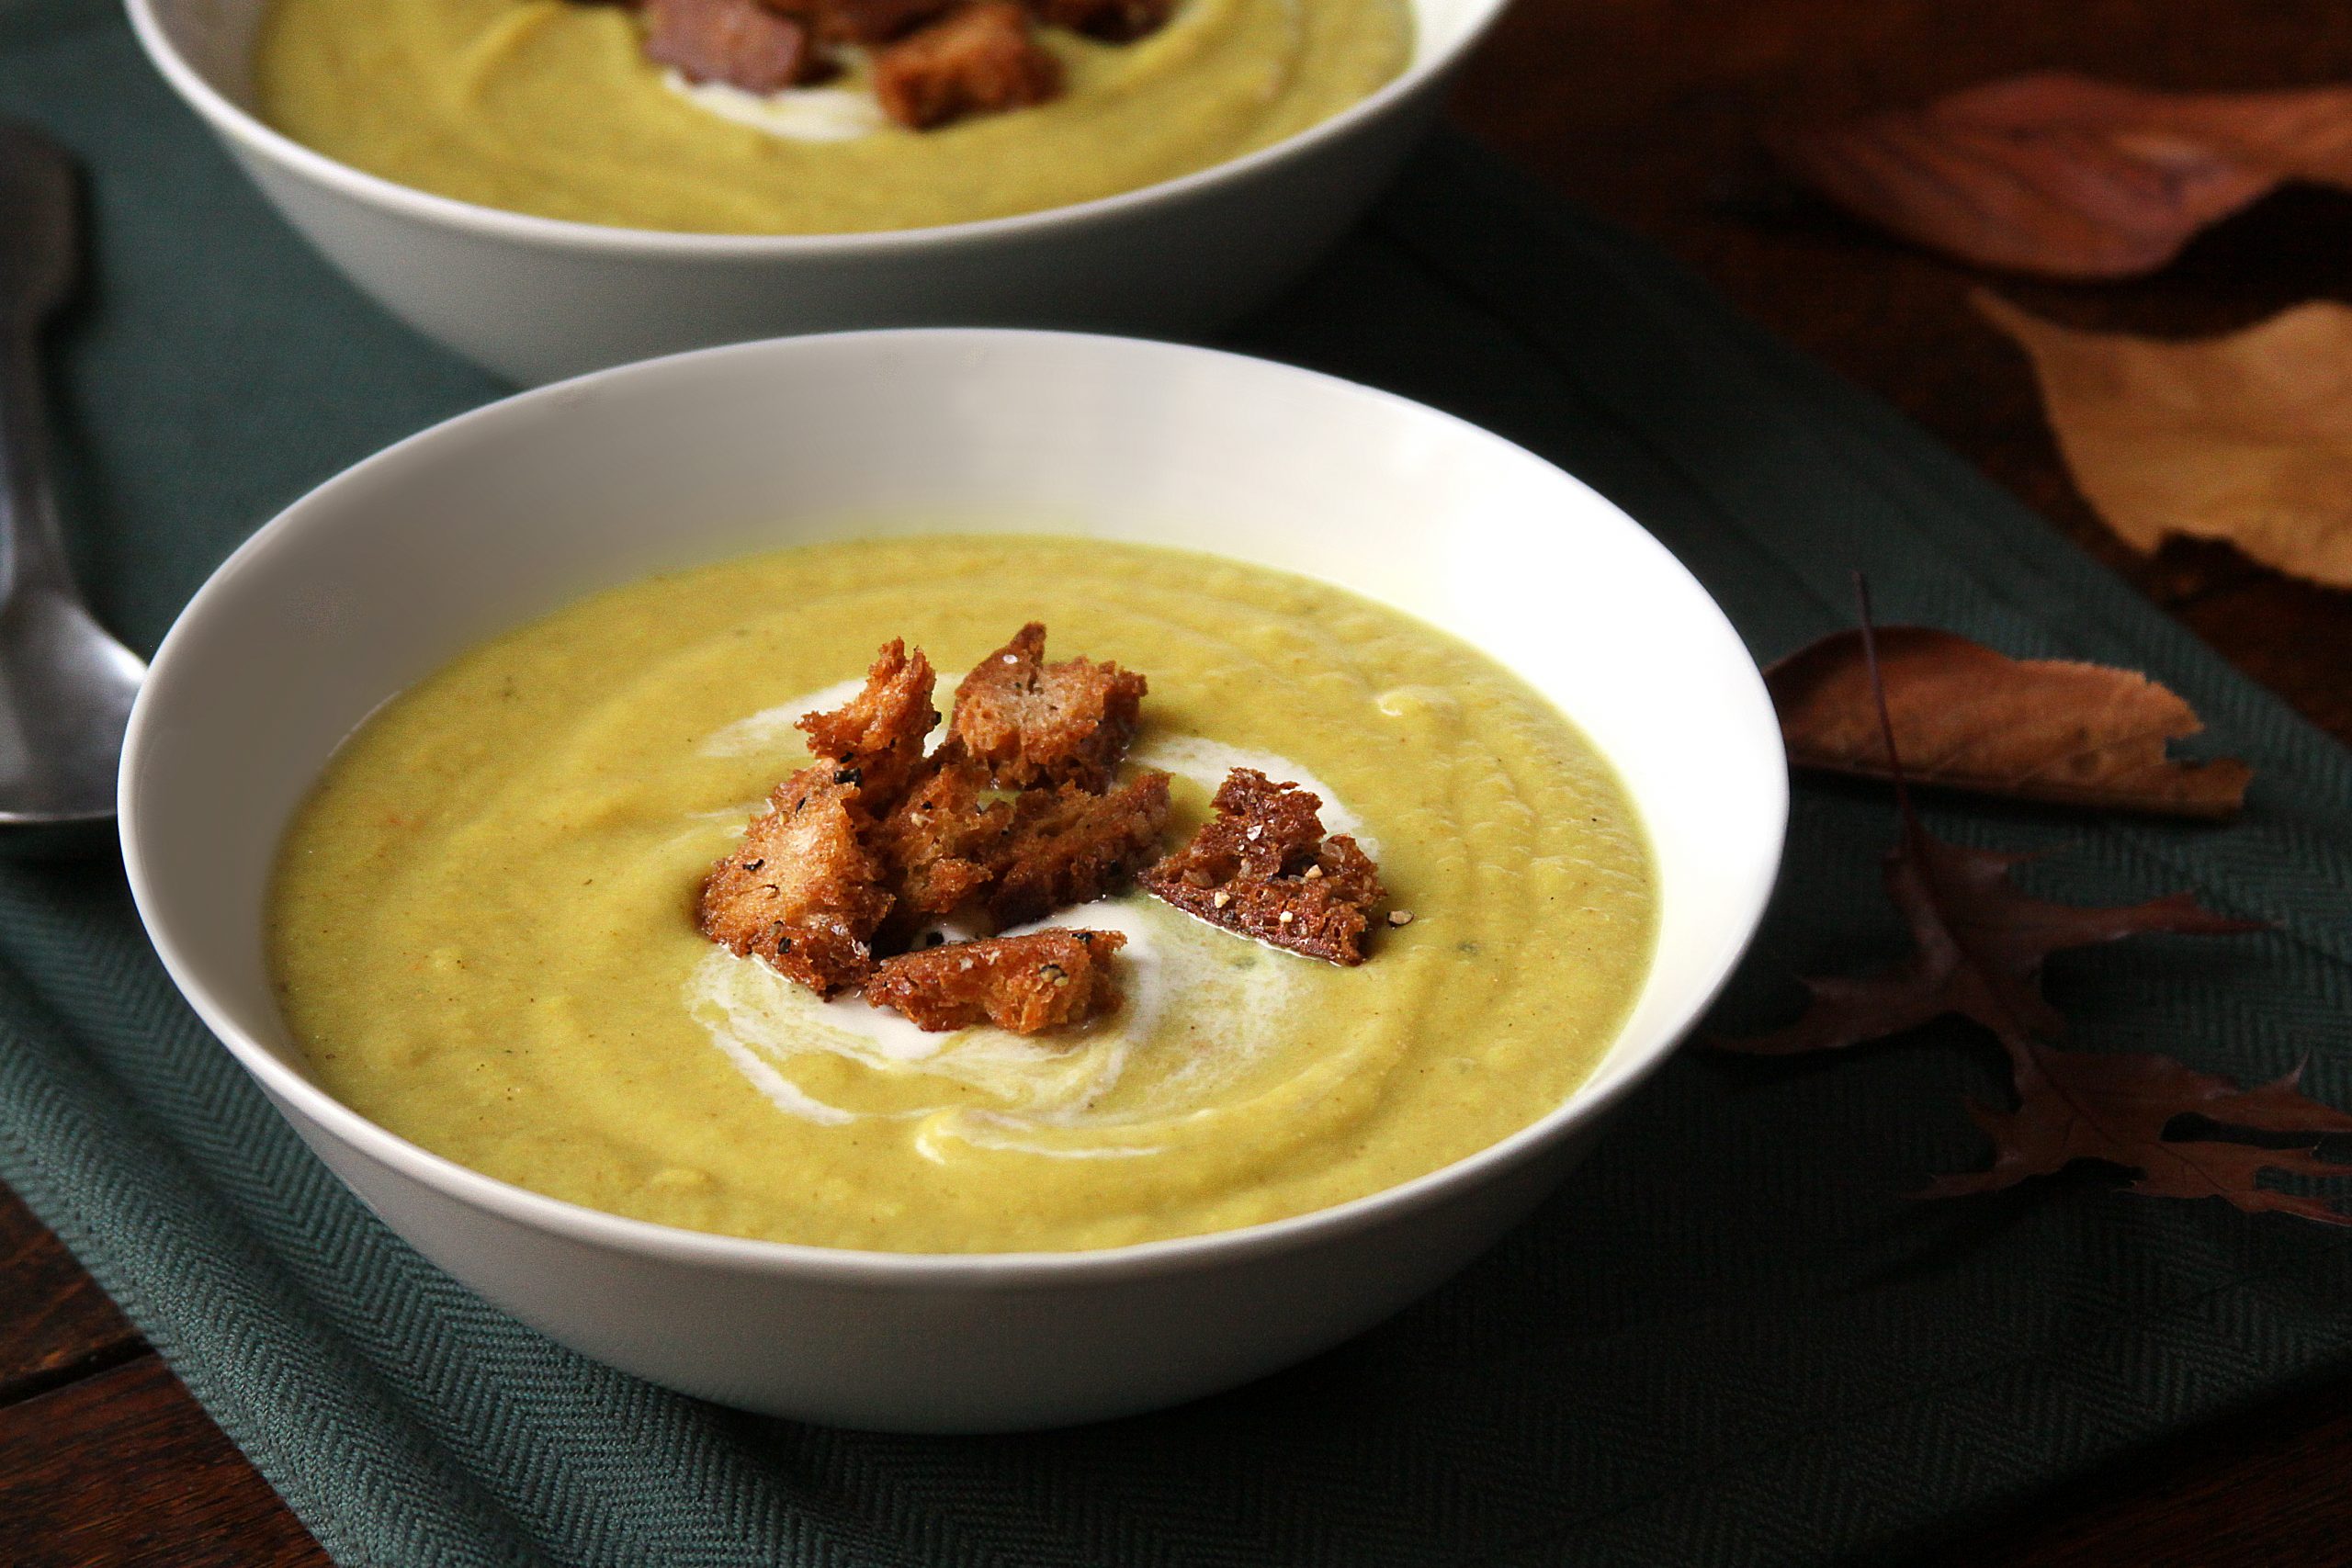 Curried parsnip soup with croutons